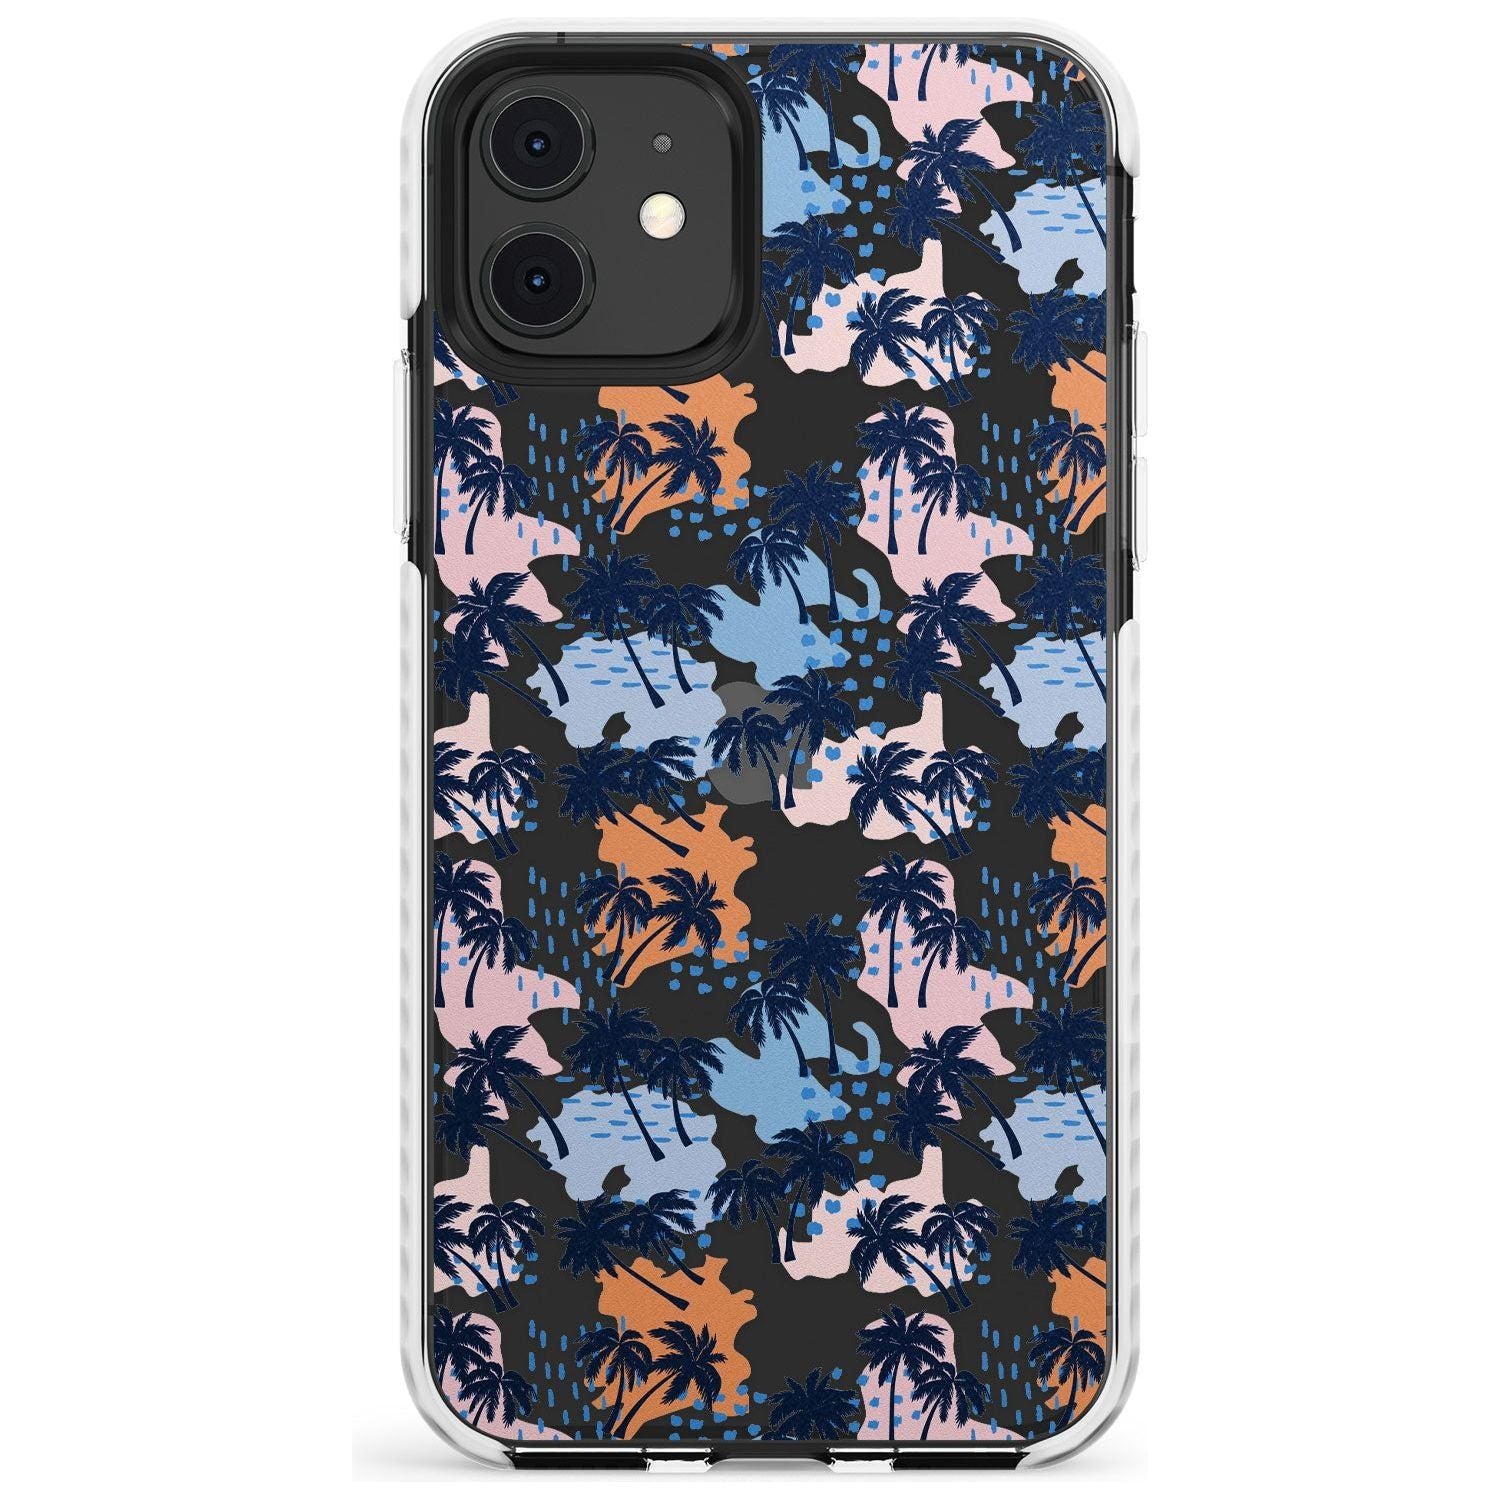 Summer Palm Trees (Clear) Slim TPU Phone Case for iPhone 11